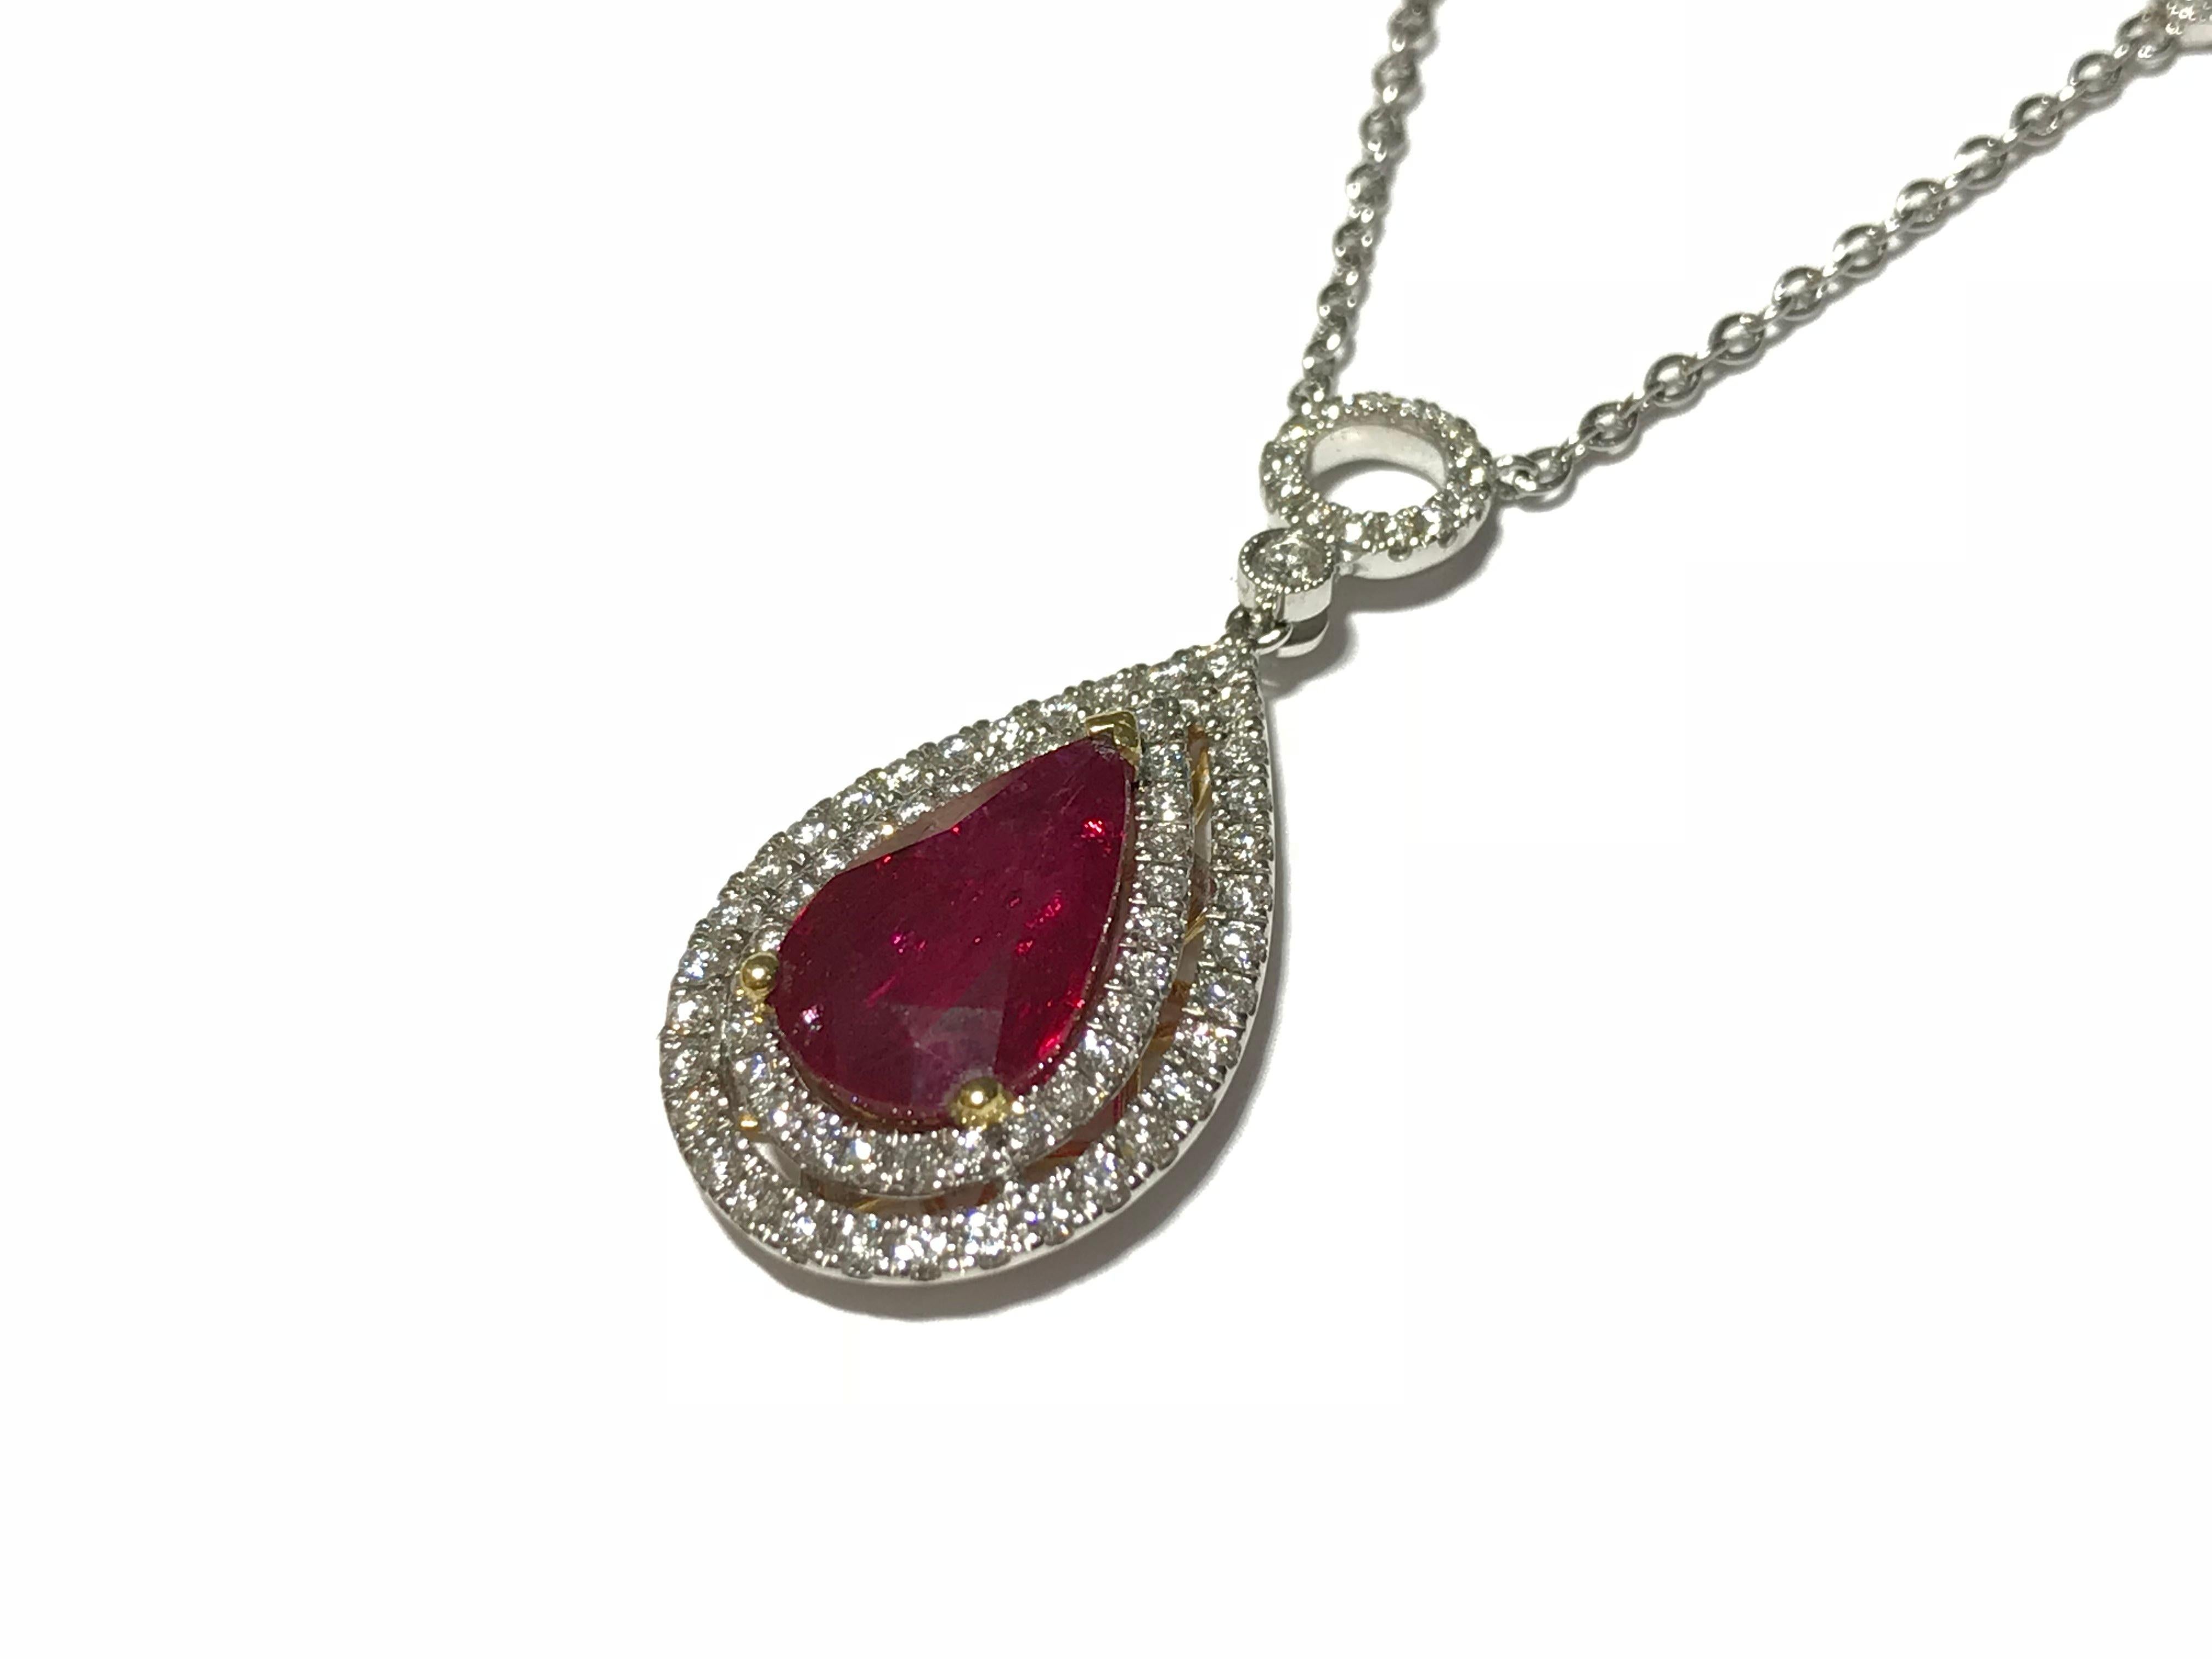 Natural Red Ruby Necklace set in 18kt w/g
3.03 ct Red ruby 
0.94 ct diamonds 